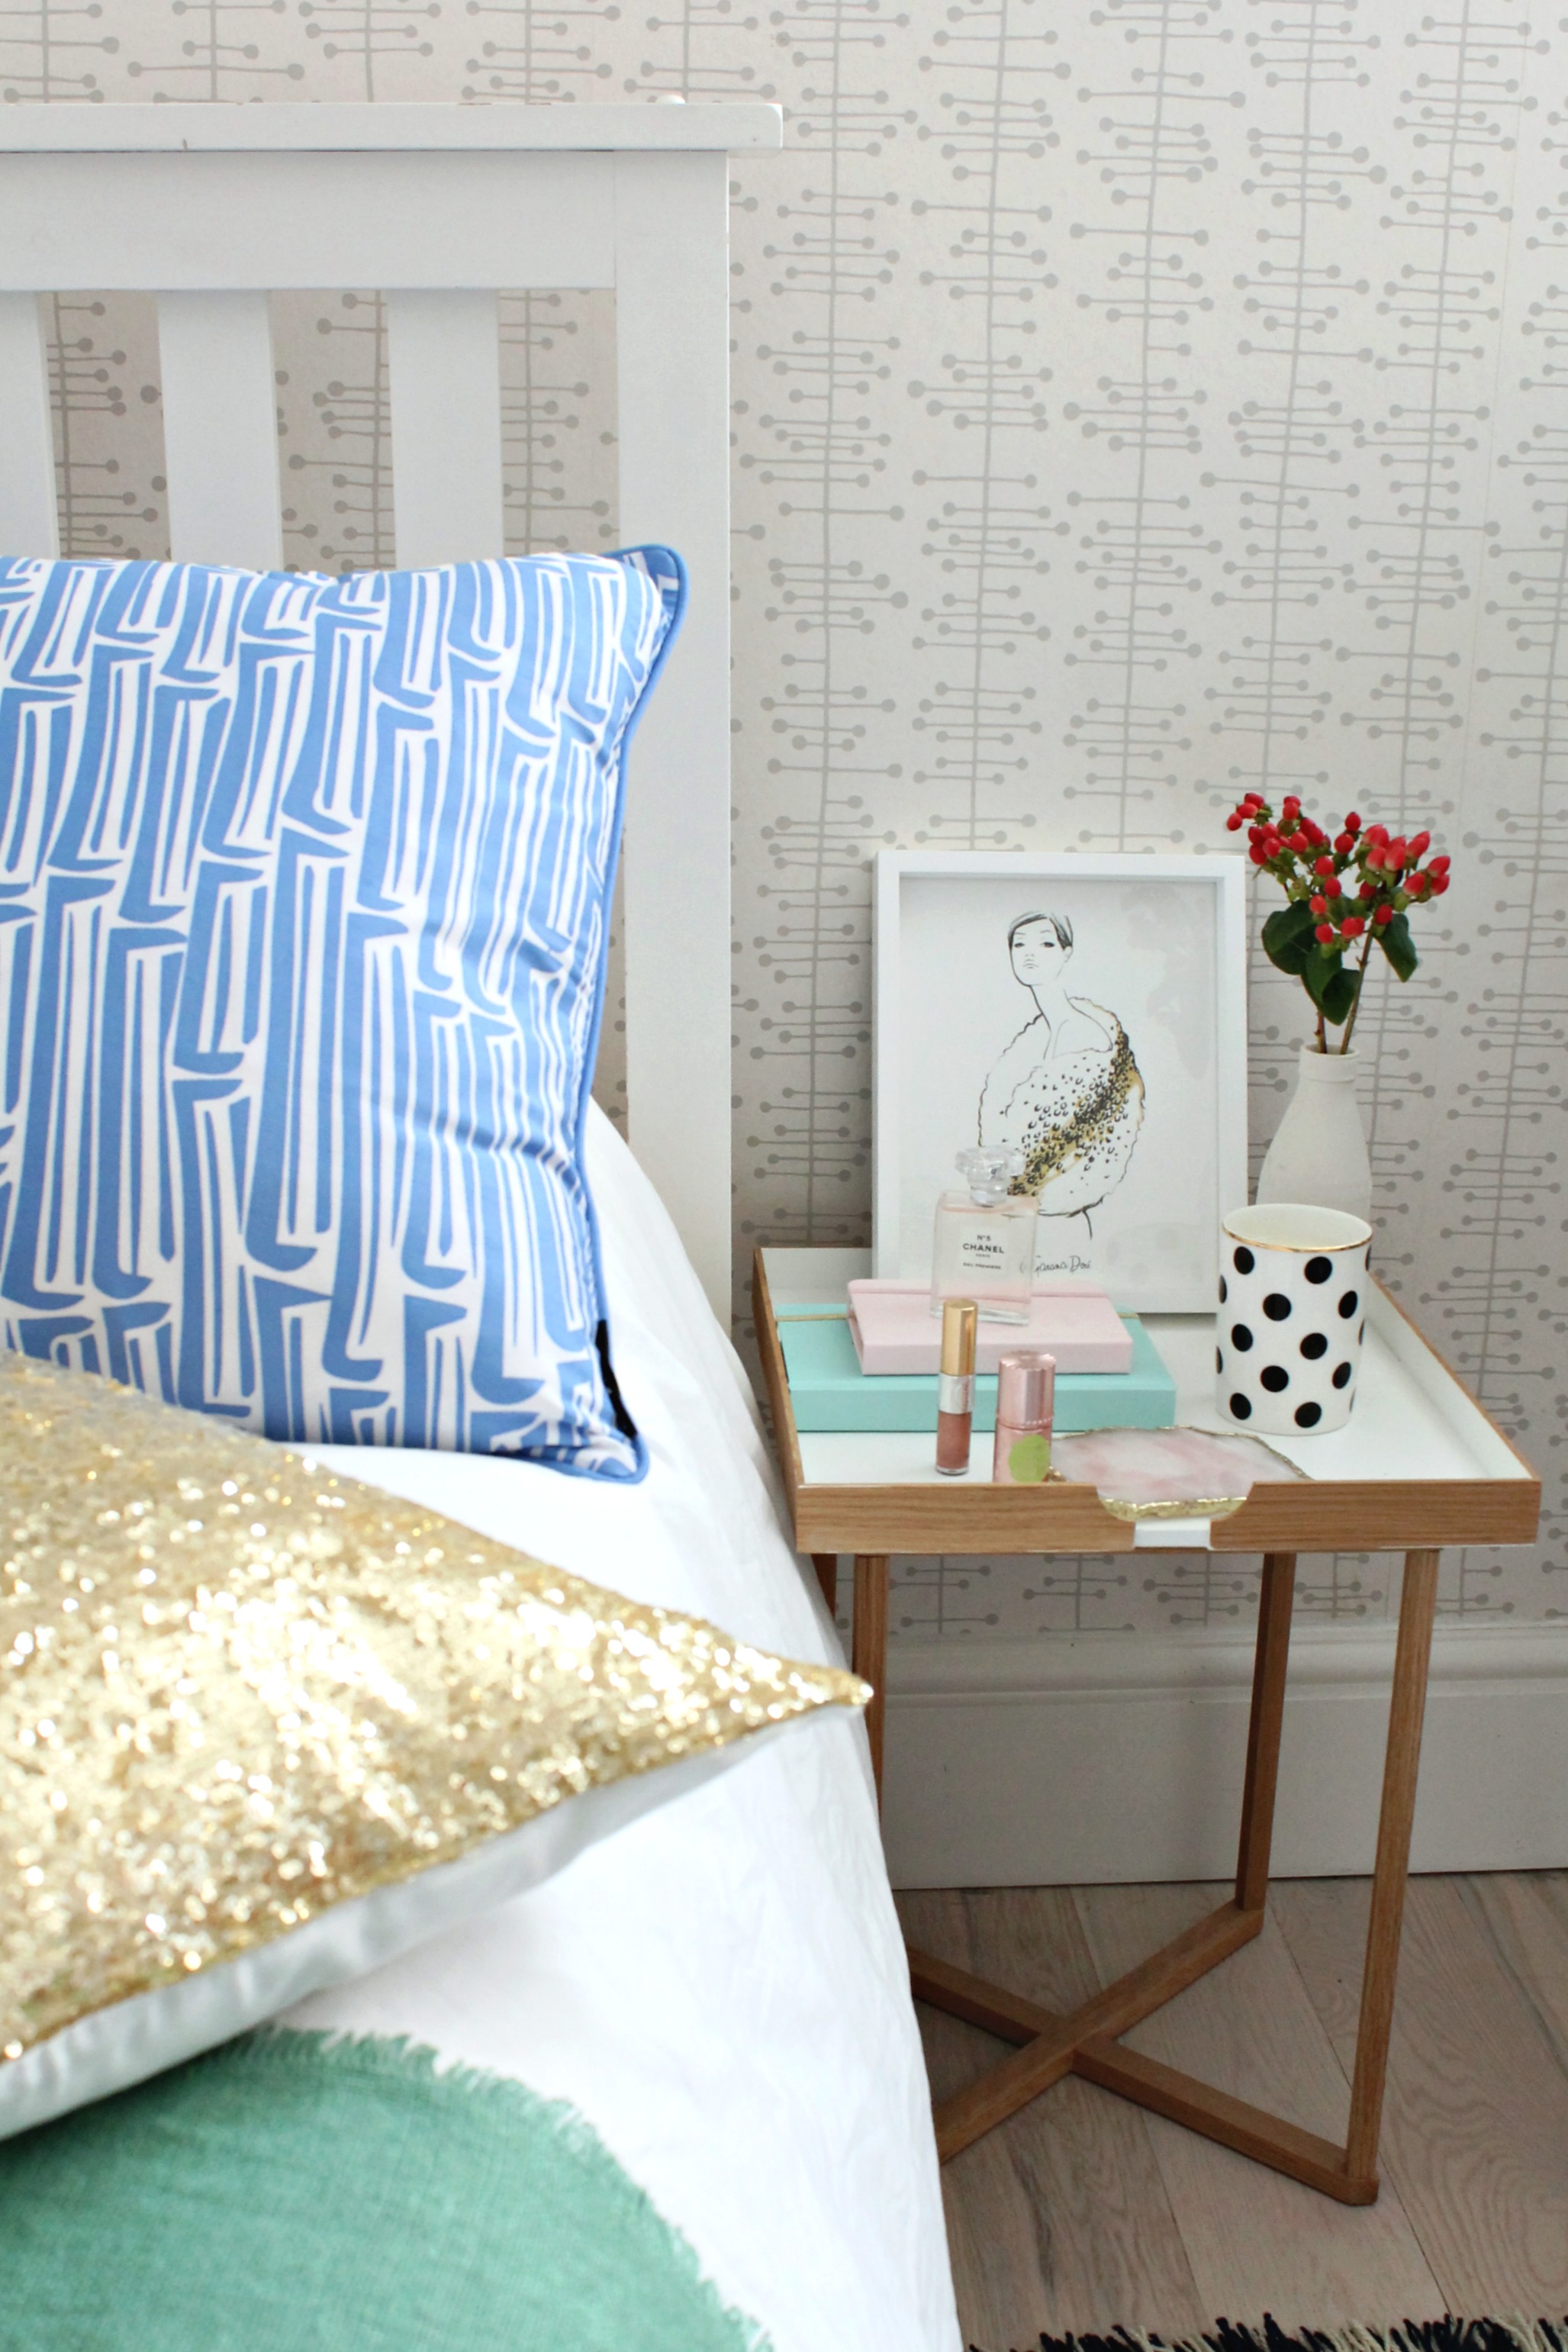 Decorate-bold-patterns-happy-and-co-cushion-photo-by-little-big-bell